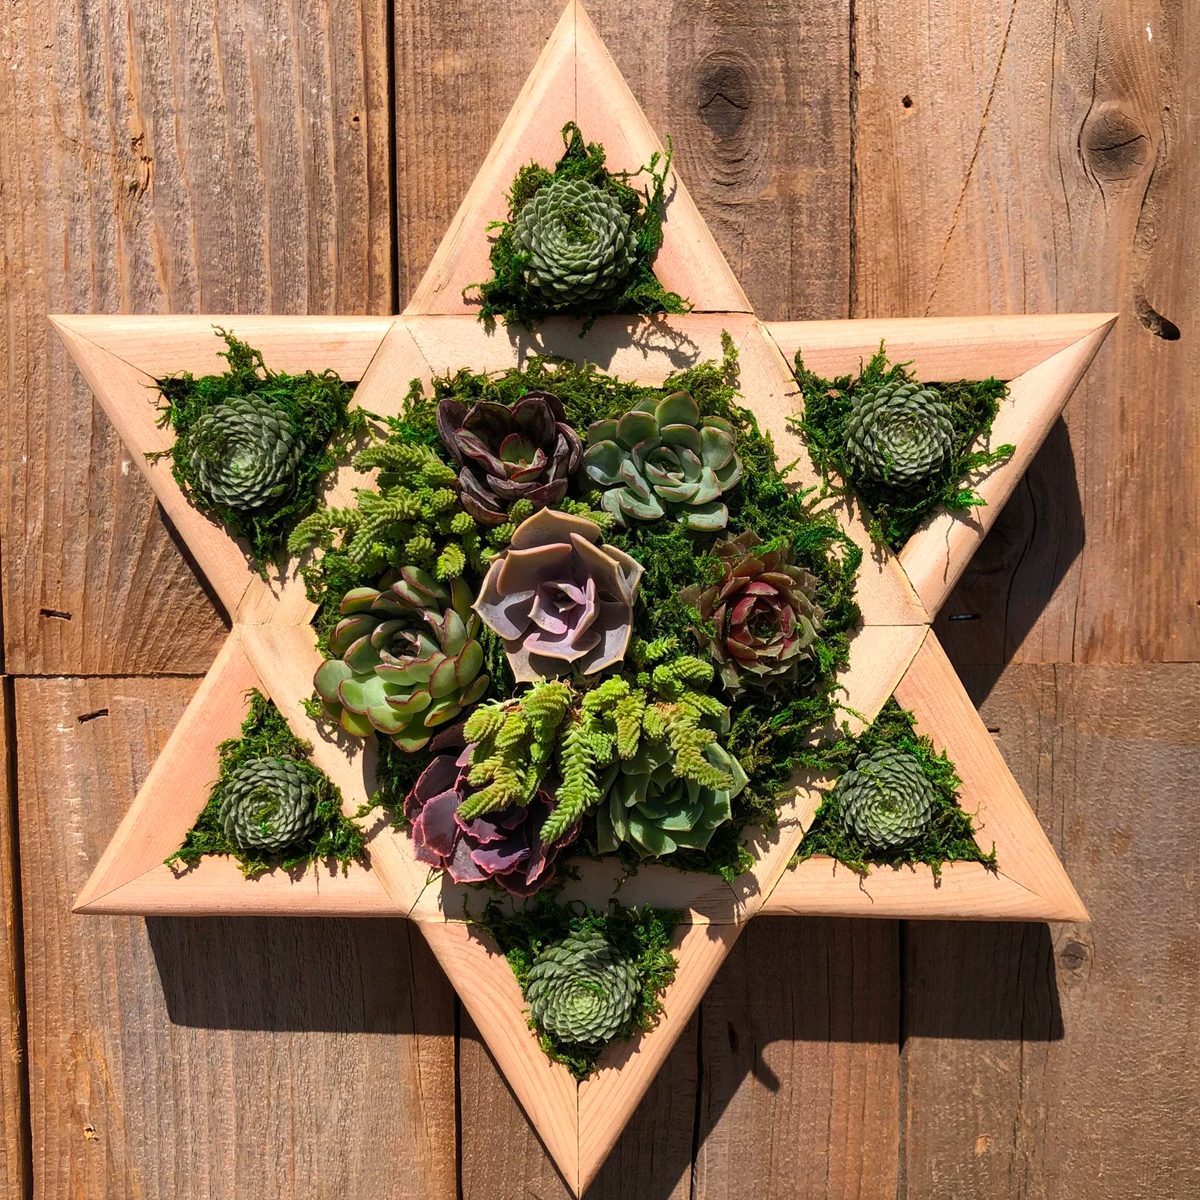 8 DIY Projects Perfect for Hanukkah